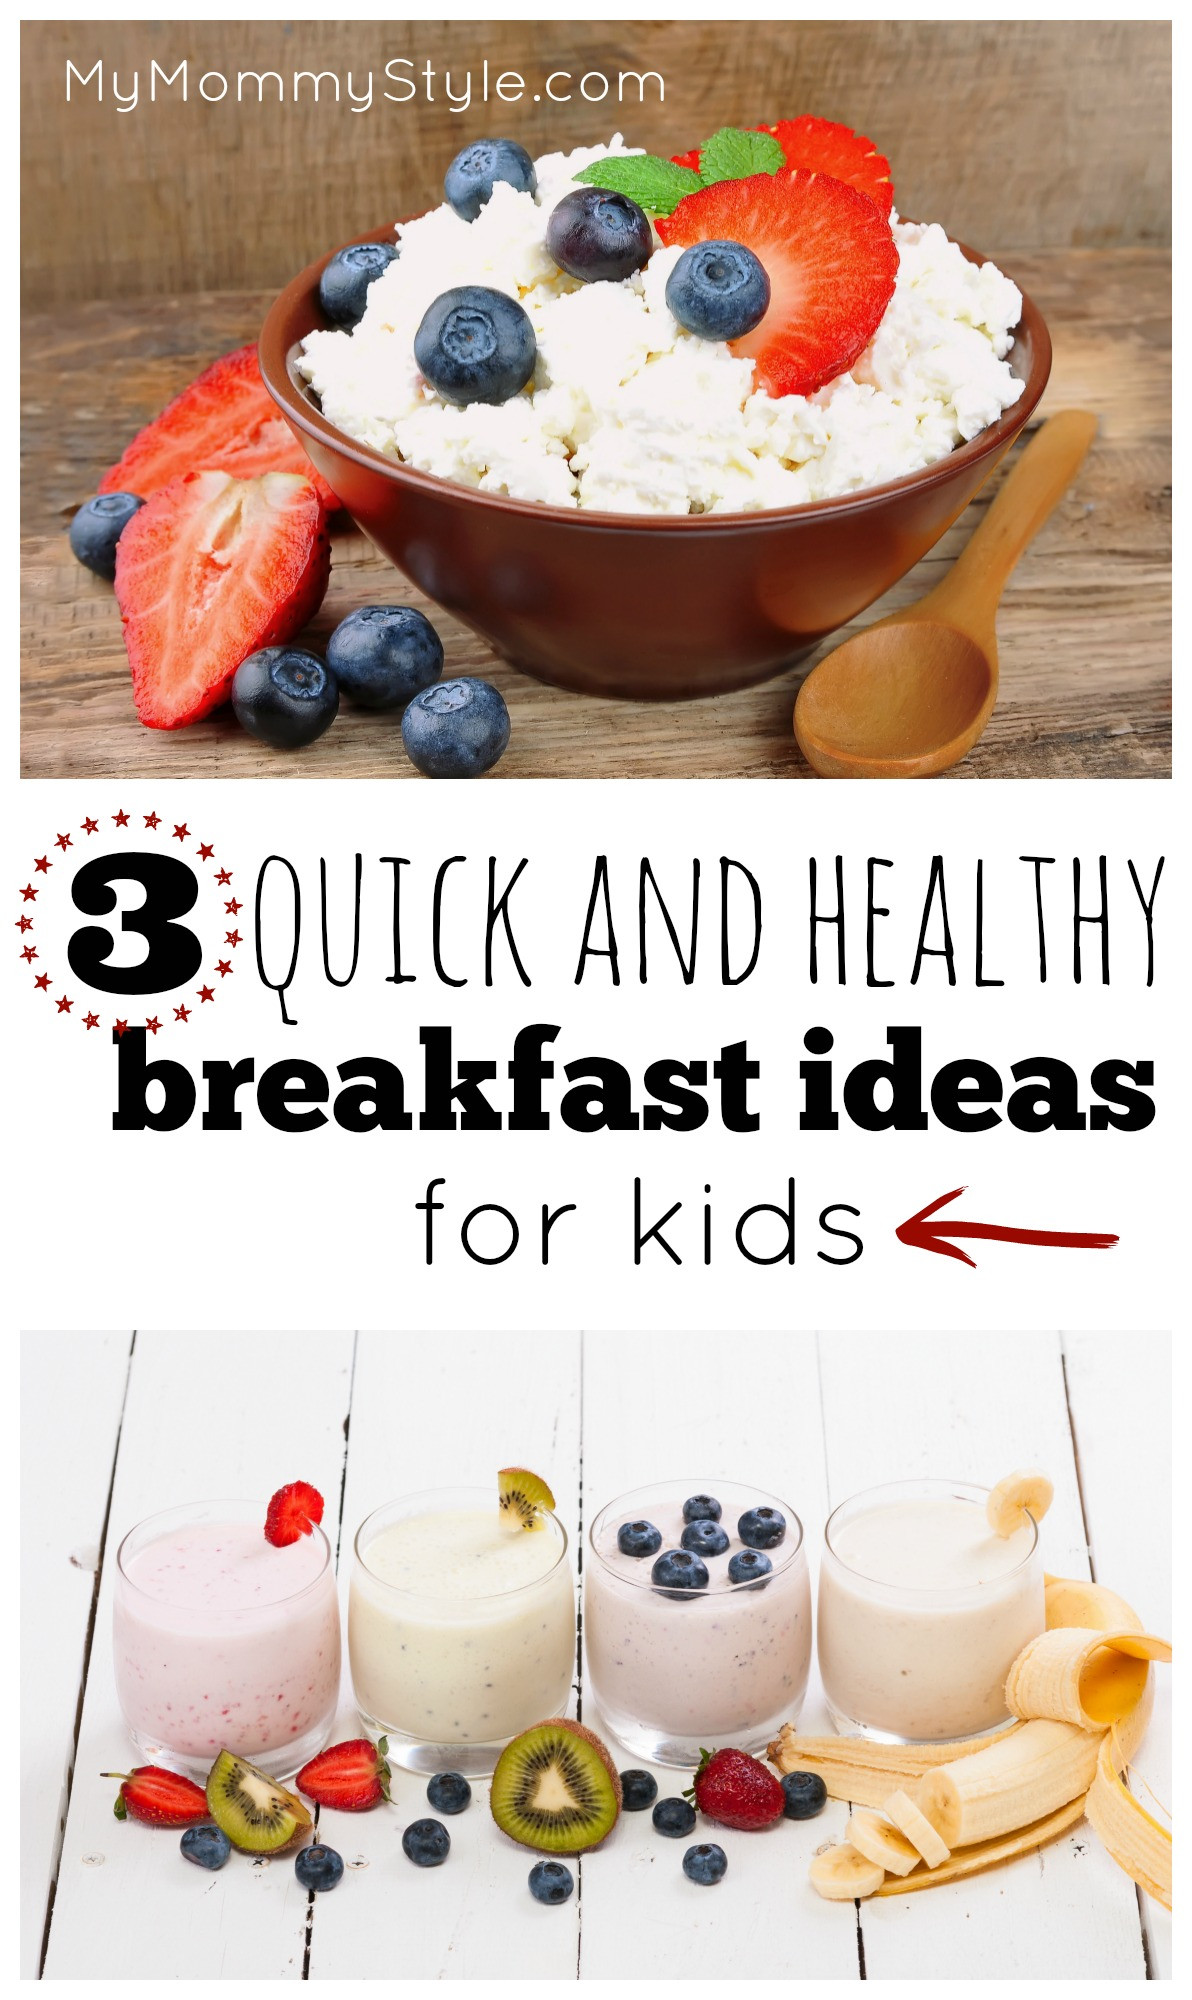 Breakfast Options For Kids
 3 Simple and Healthy Breakfast Ideas My Mommy Style